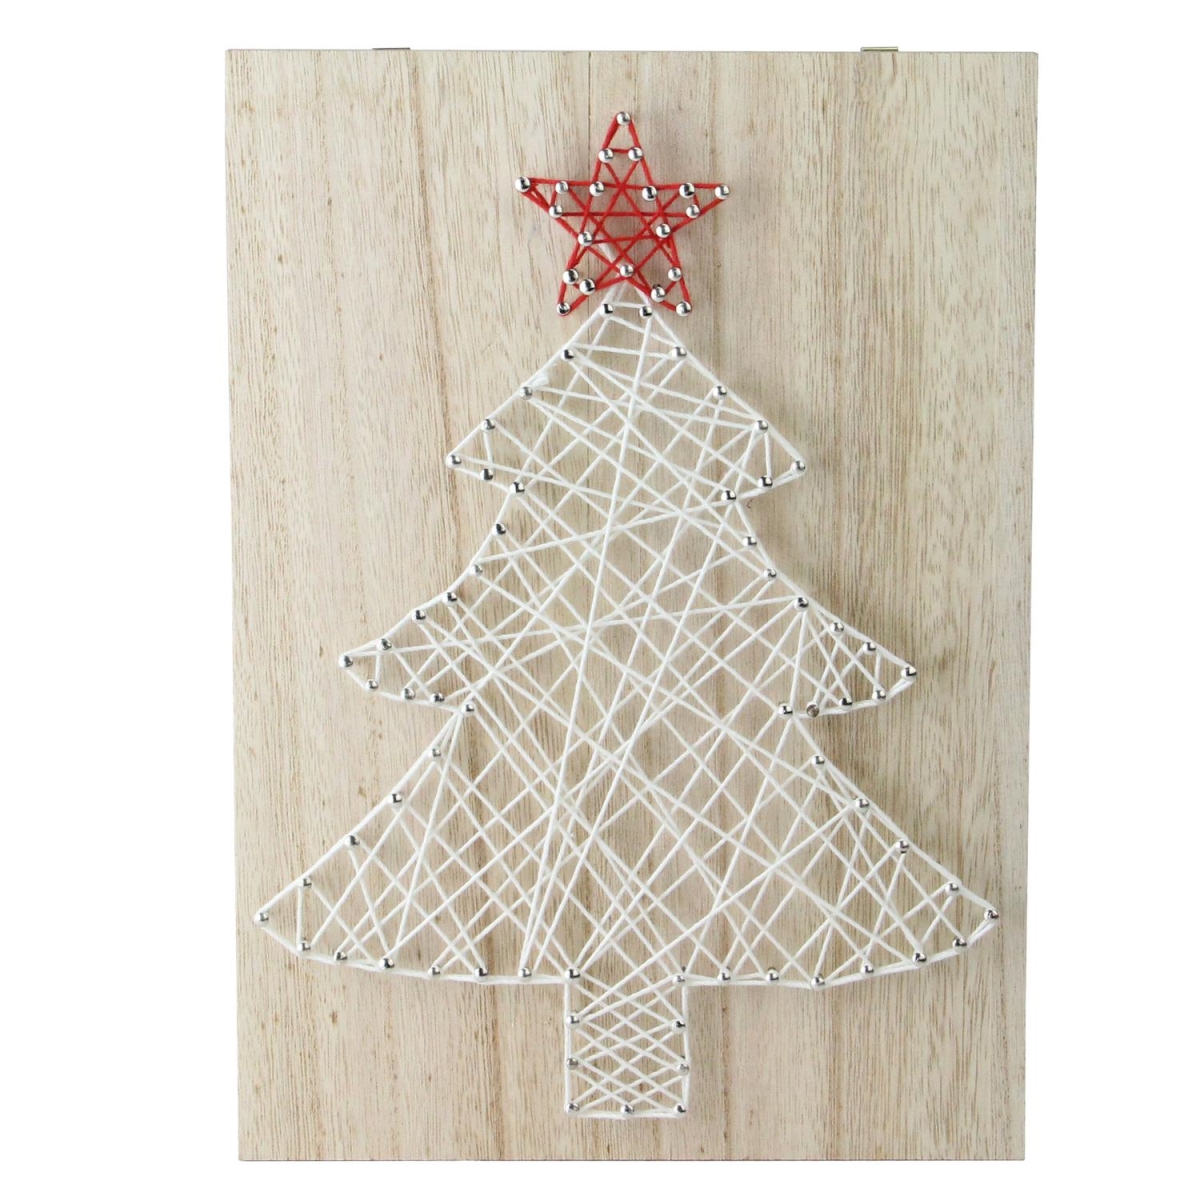 Northlight 32623018 11 in. Christmas Tree Wall Decoration, White